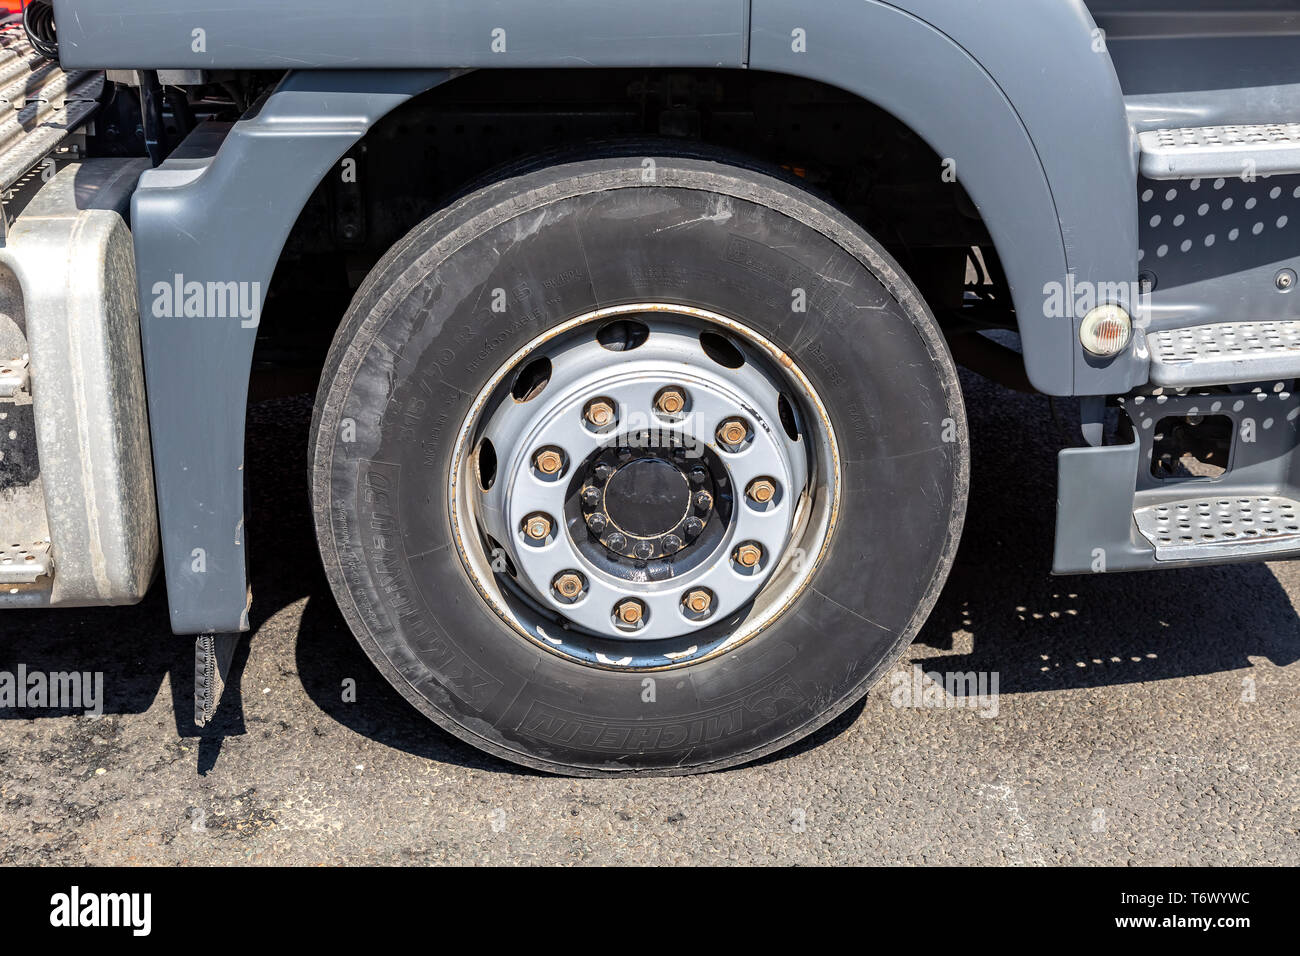 Samara, Russia - May 1, 2019: Close up view of MAN truck wheel with Michelin tire Stock Photo